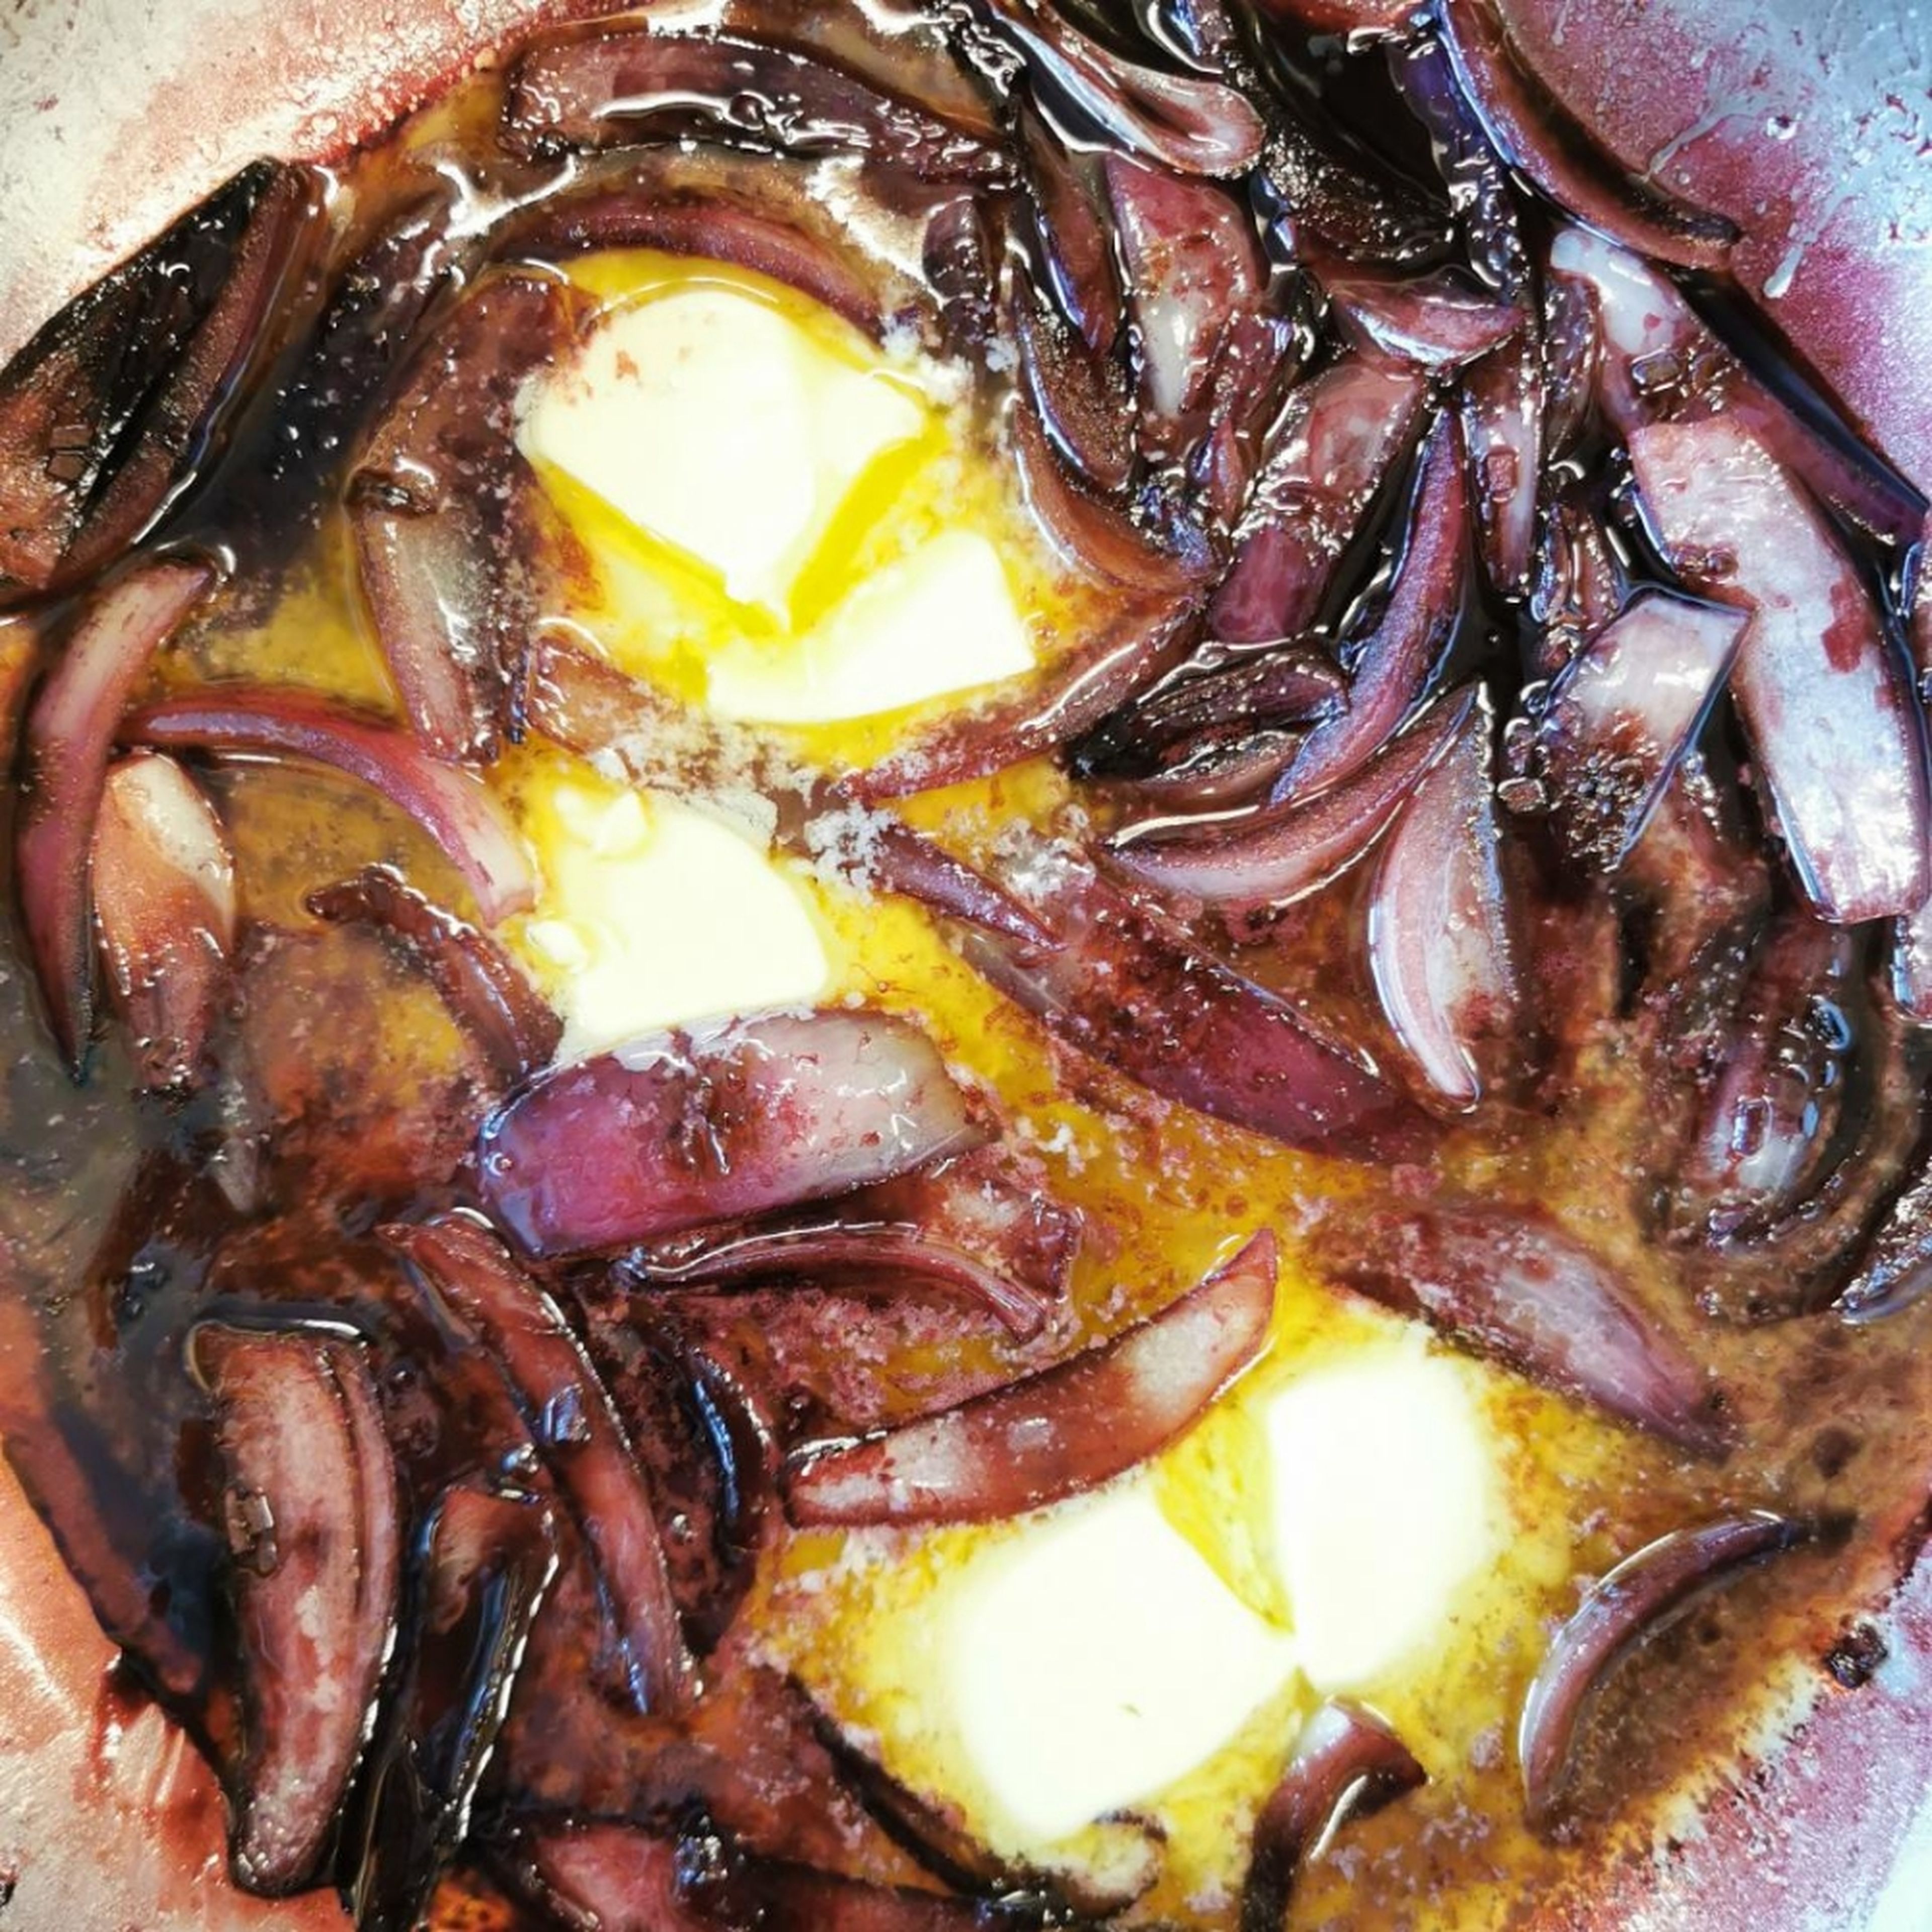 Sauté the onions in a pan with a little oil. After about 5 minutes add the garlic and after about 1 minute sprinkle everything with sugar. Now wait until the sugar has caramelized. Then immediately deglaze with the remaining red wine and add butter.